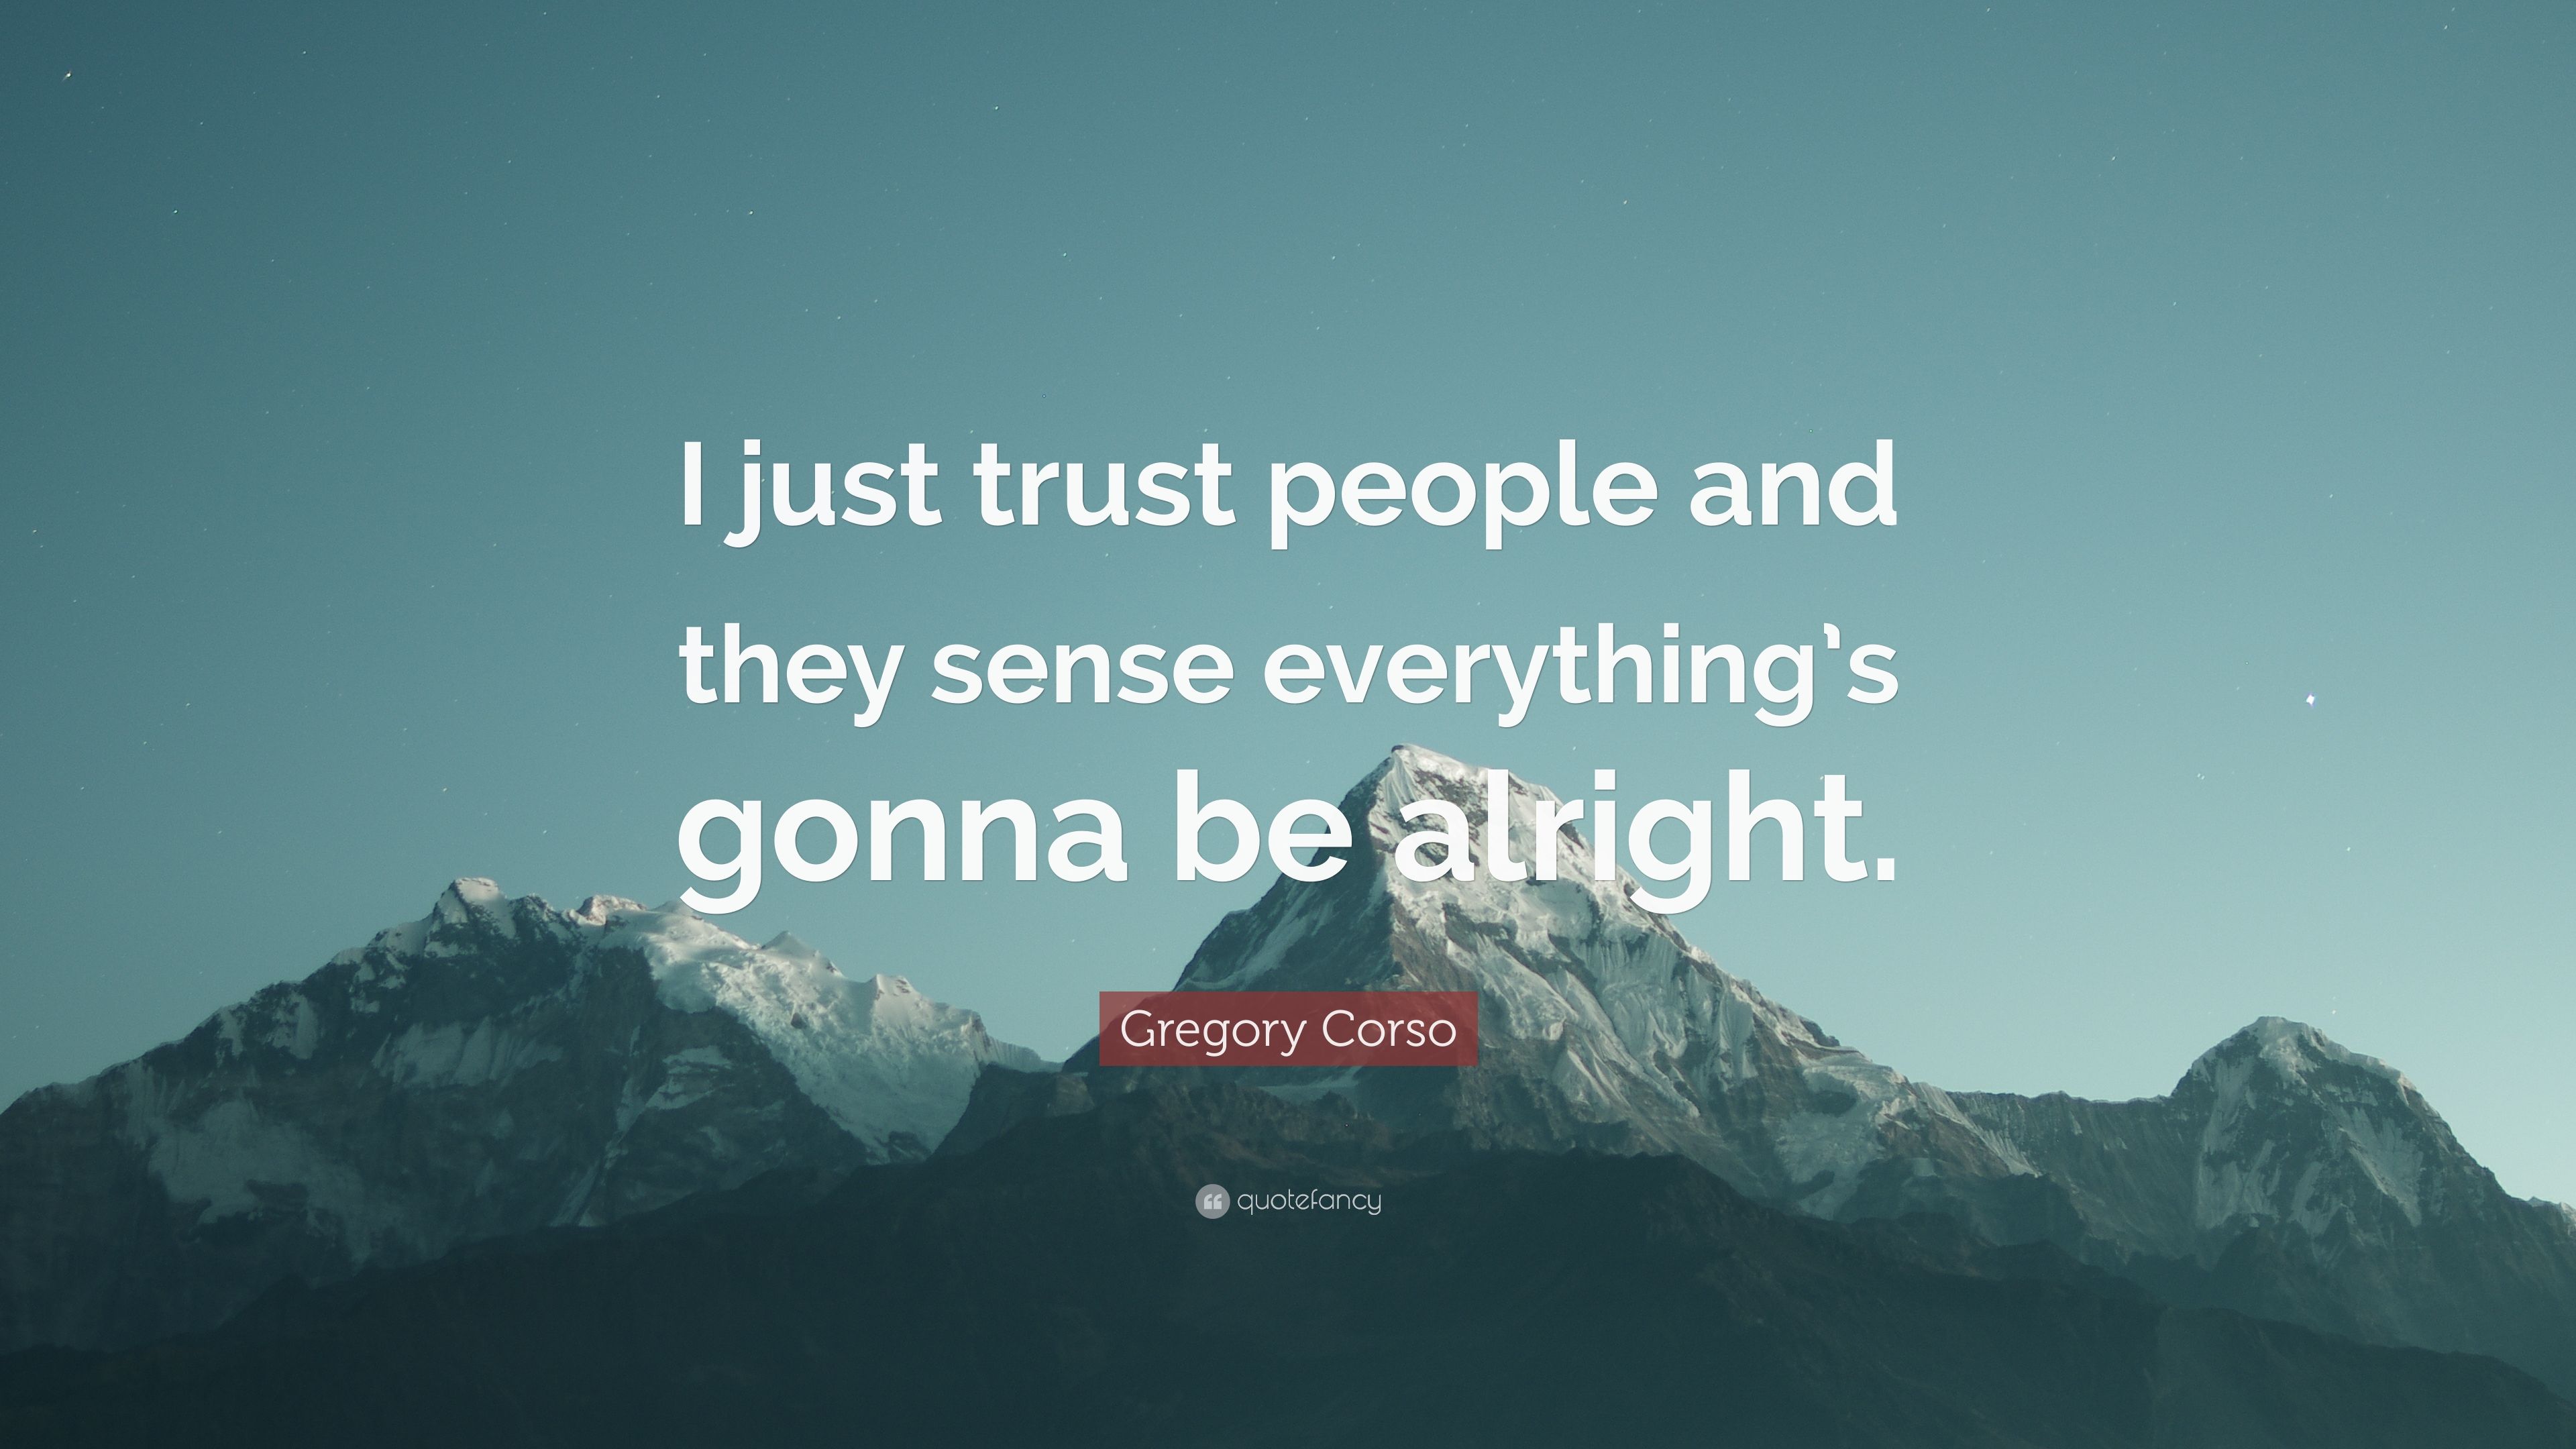 Gregory Corso Quote: “I just trust people and they sense everything's gonna be alright.” (7 wallpaper)